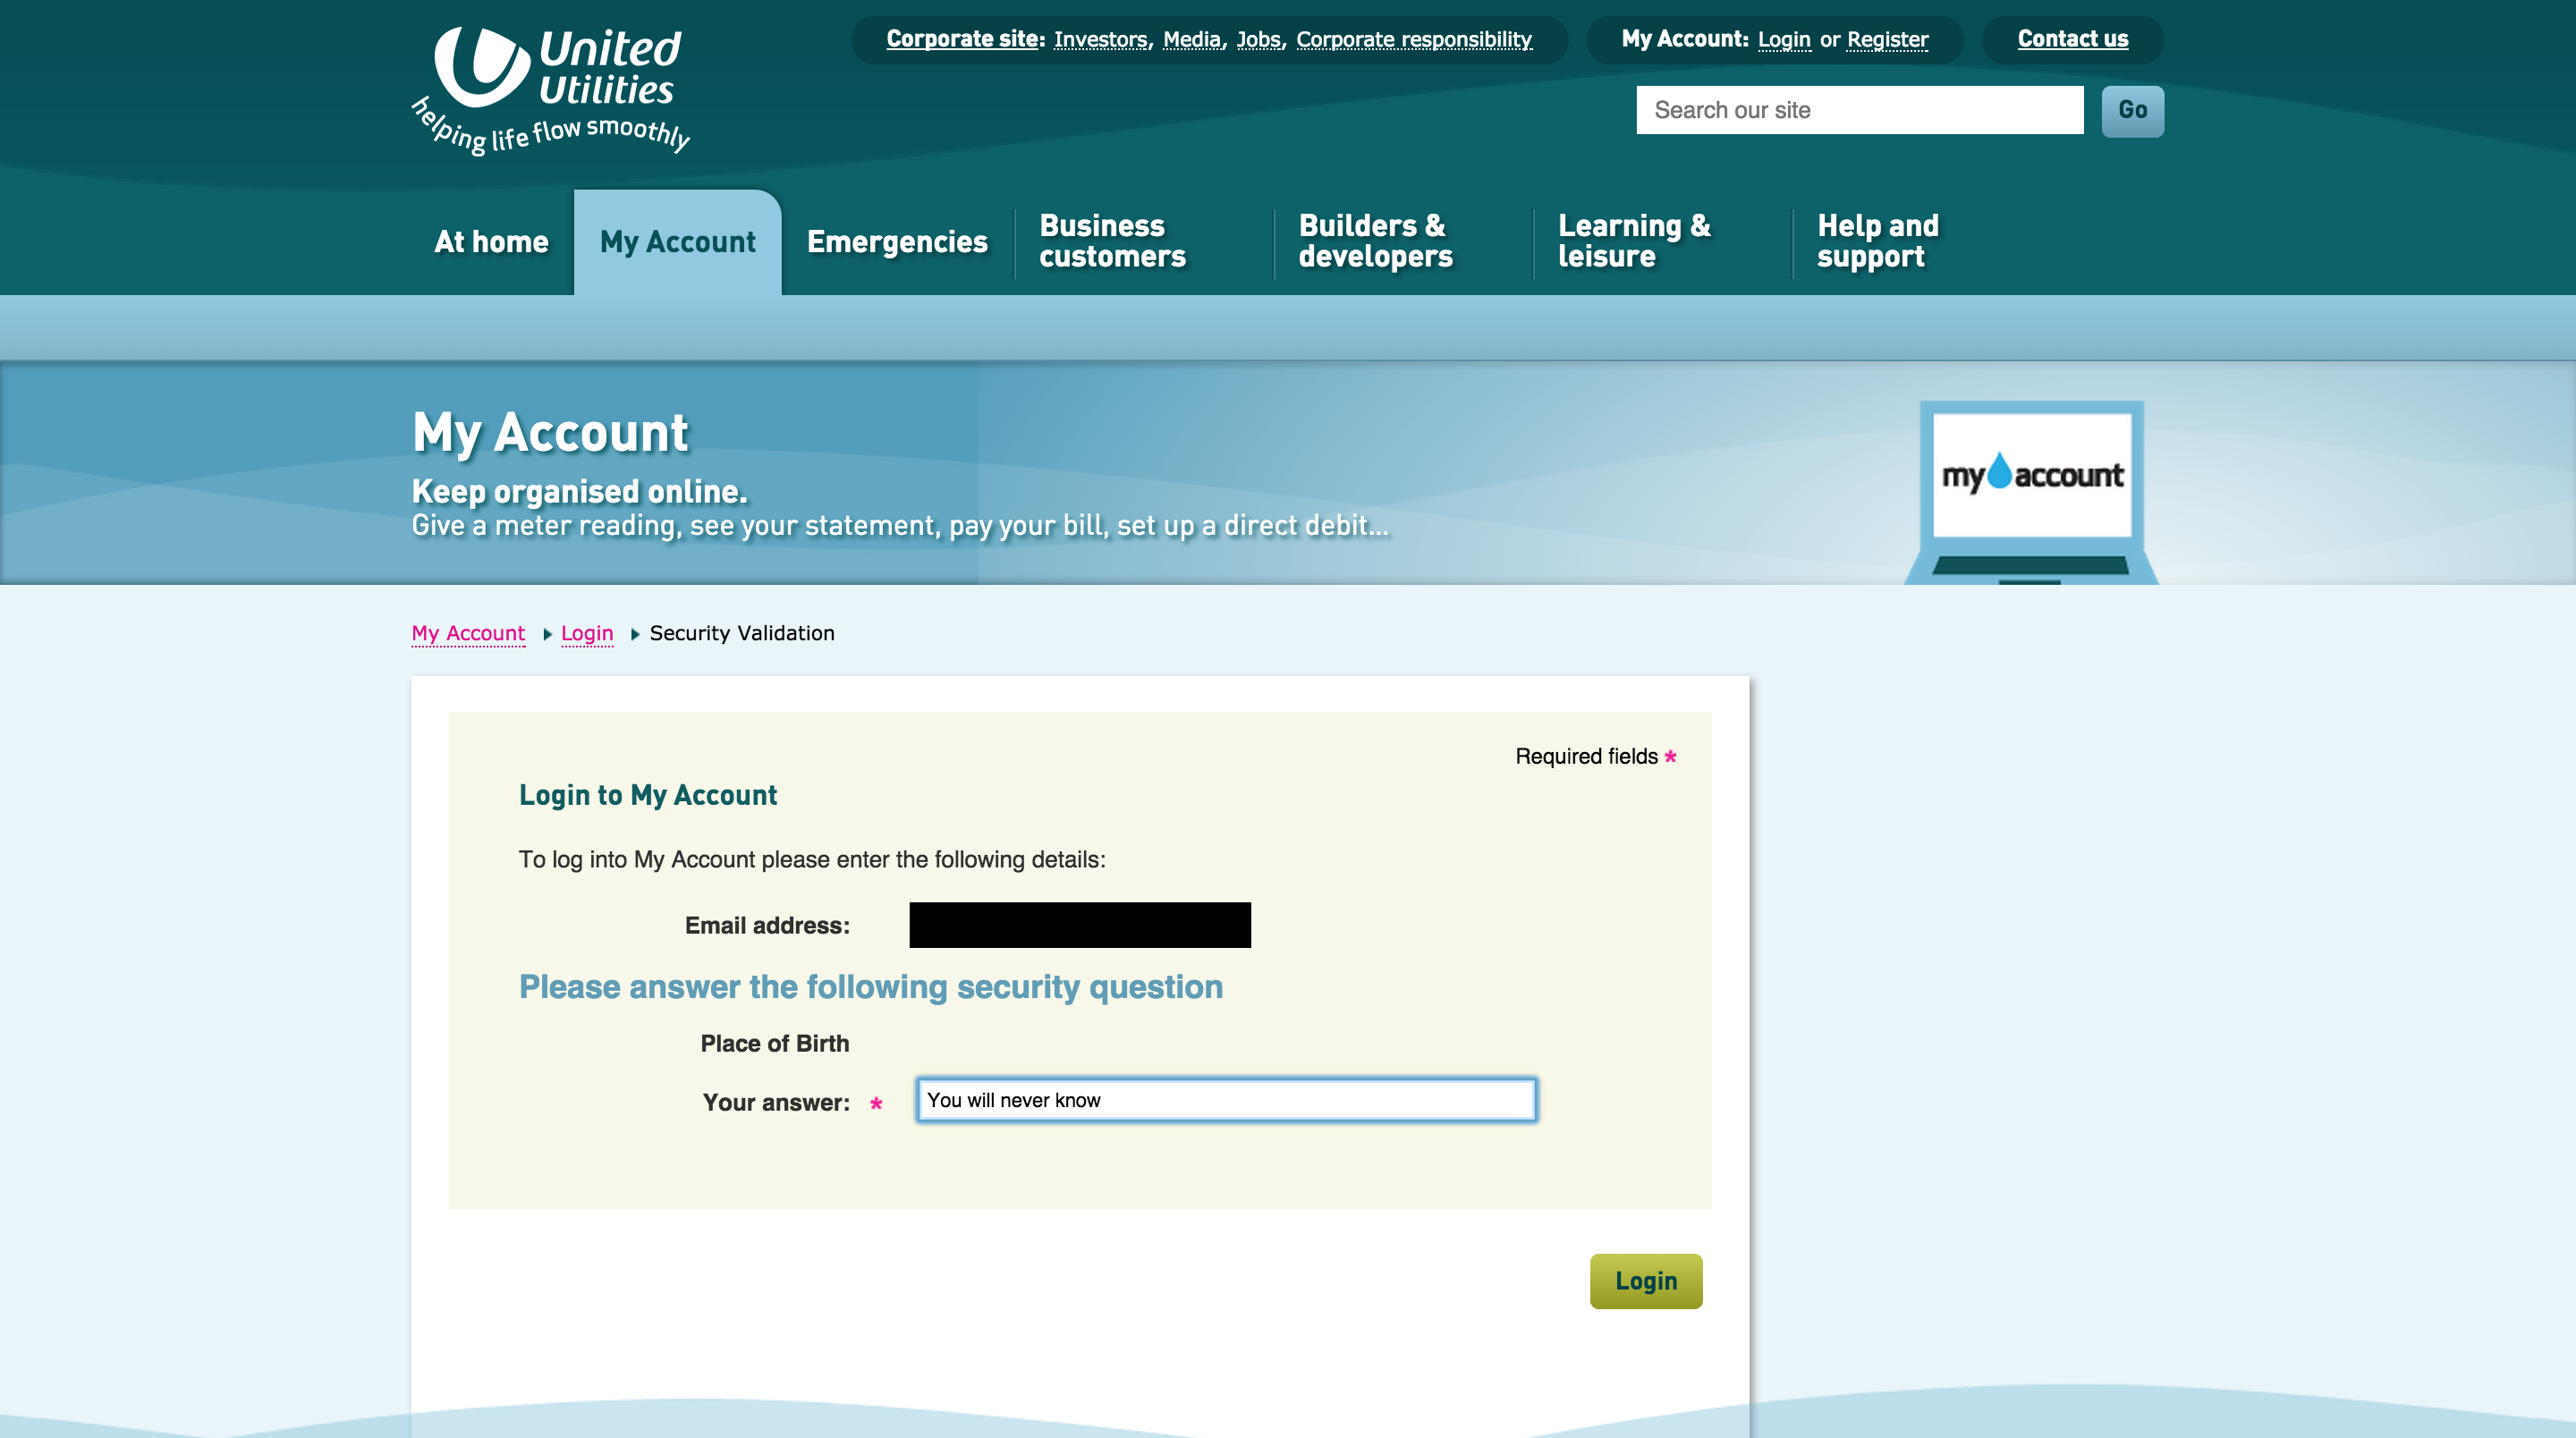 Logging into United Utilities asks for a security question when logging in.